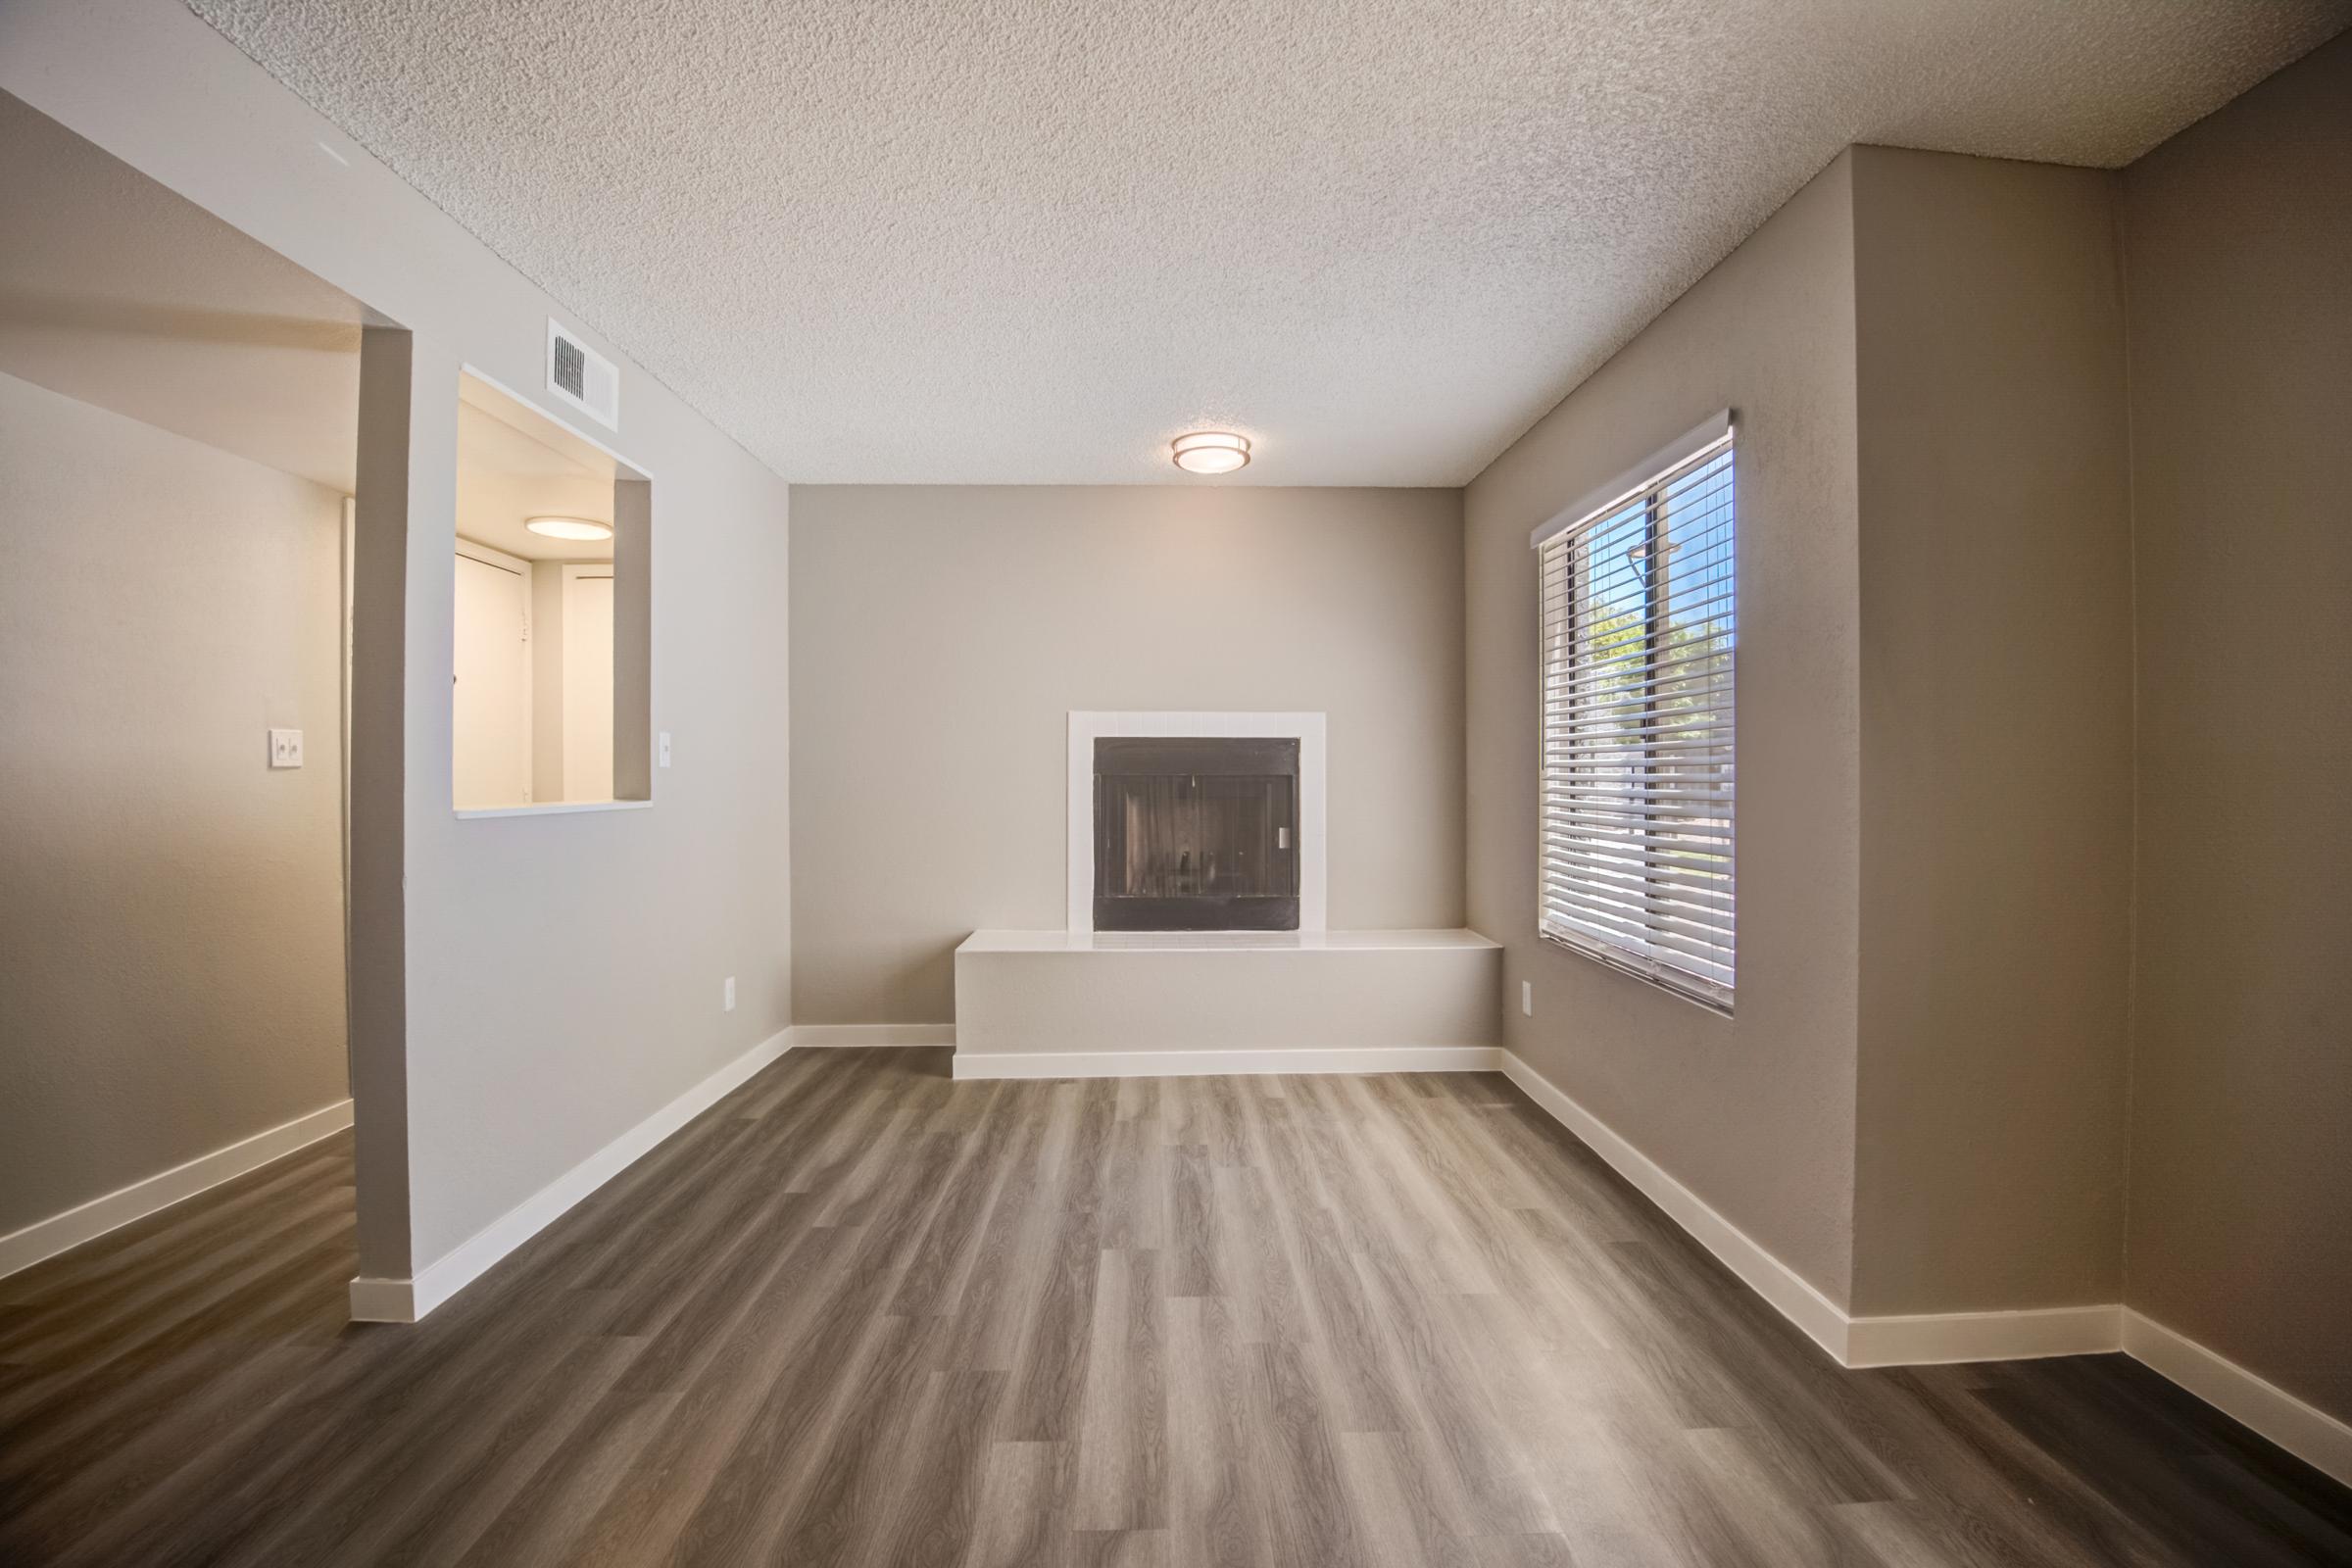 An apartment living area with a fireplace at Rise at the Meadows.